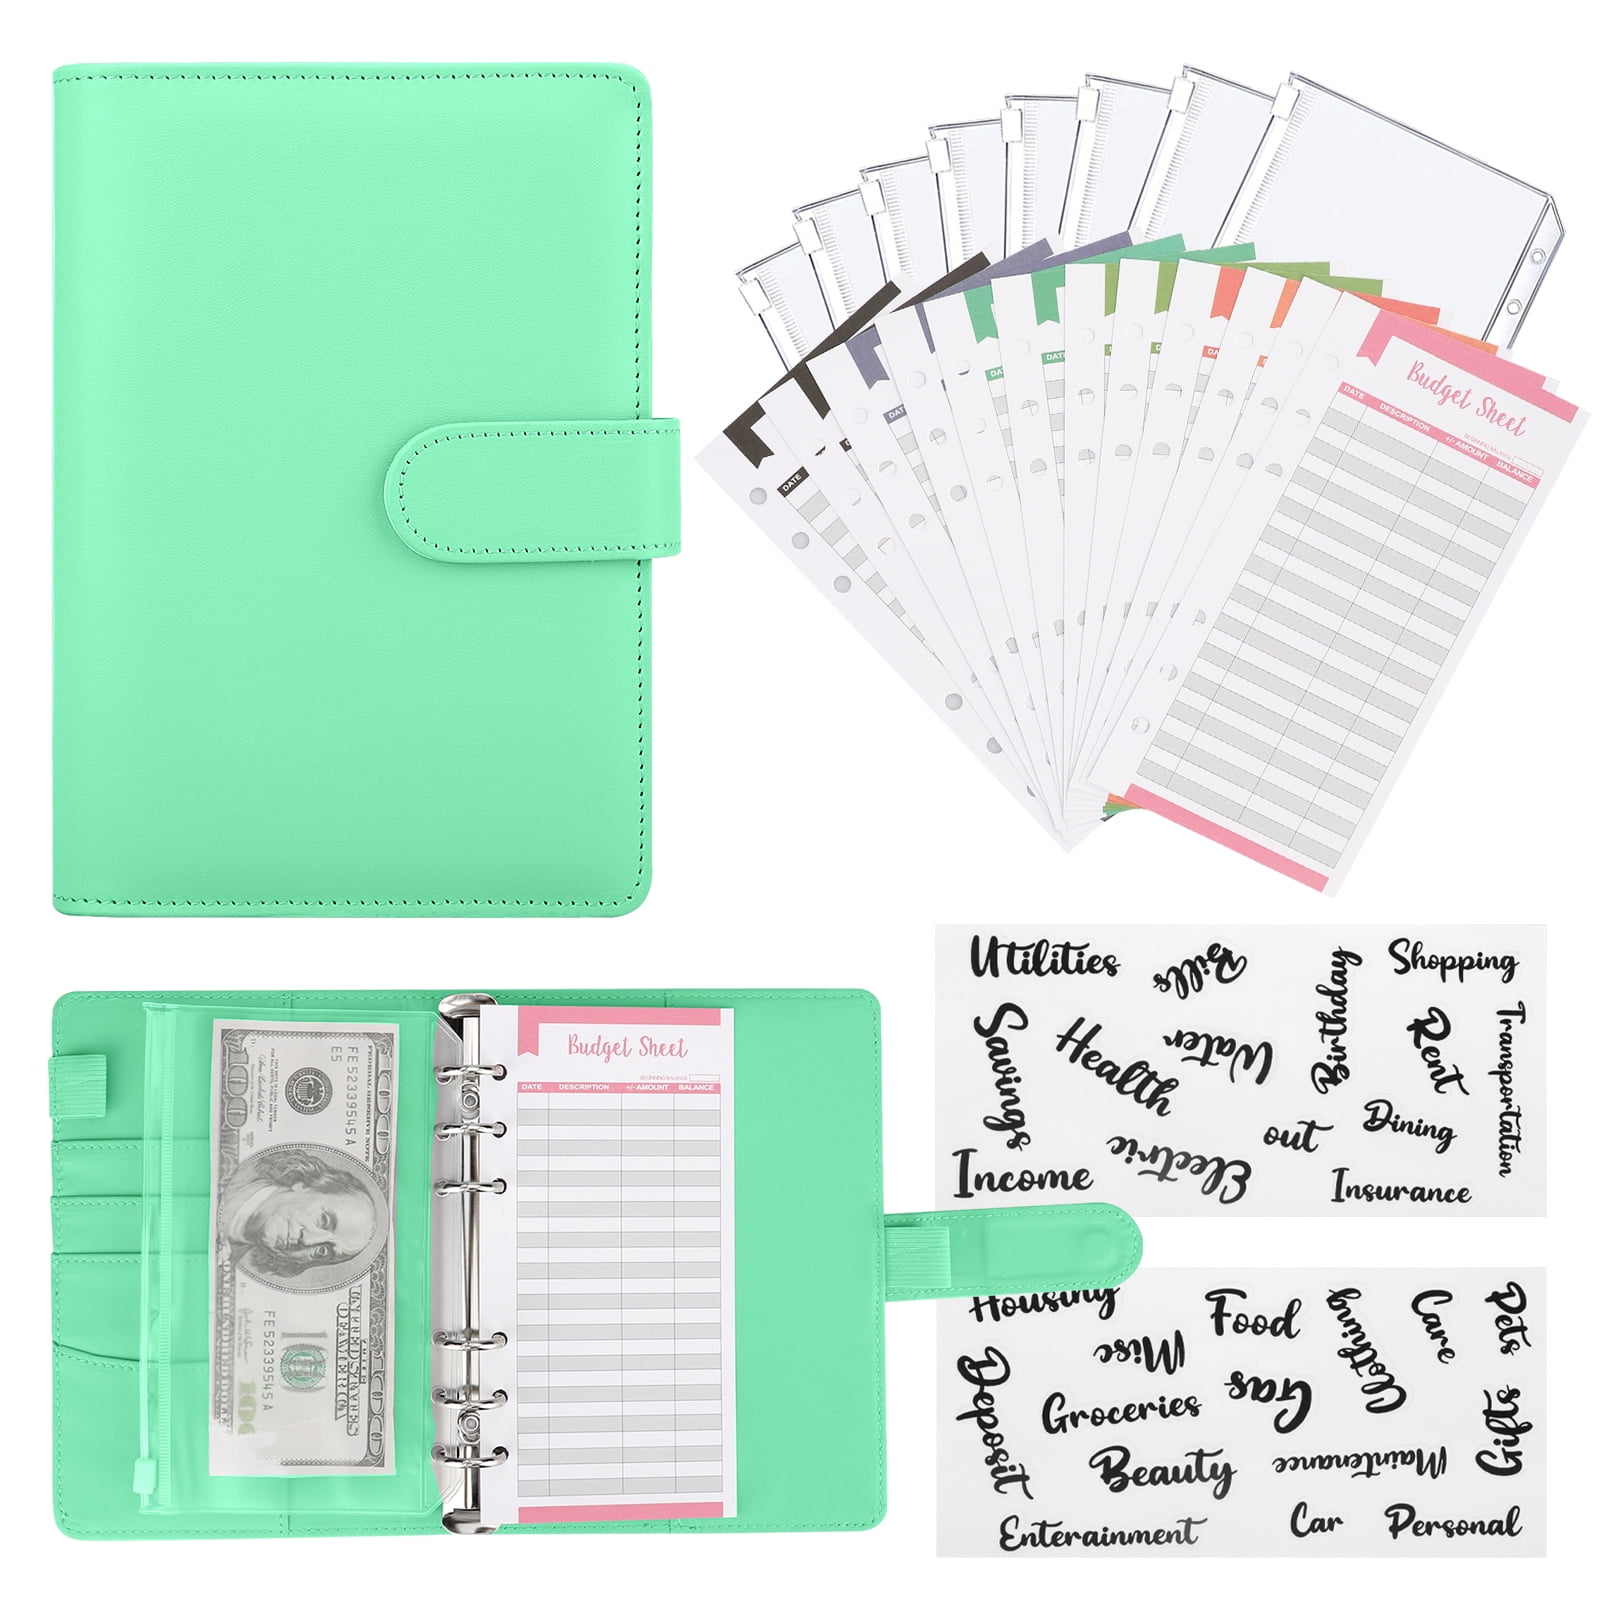 A6 Budget Planner Refill Insert Sheet, TSV 85Pcs A6 Refill Paper with  Expense Tracker Budget Sheets, Weekly/Monthly Calendar, Budget Stickers,  Fit for Refillable 6 Ring Binder - 6.77 x 3.74” 